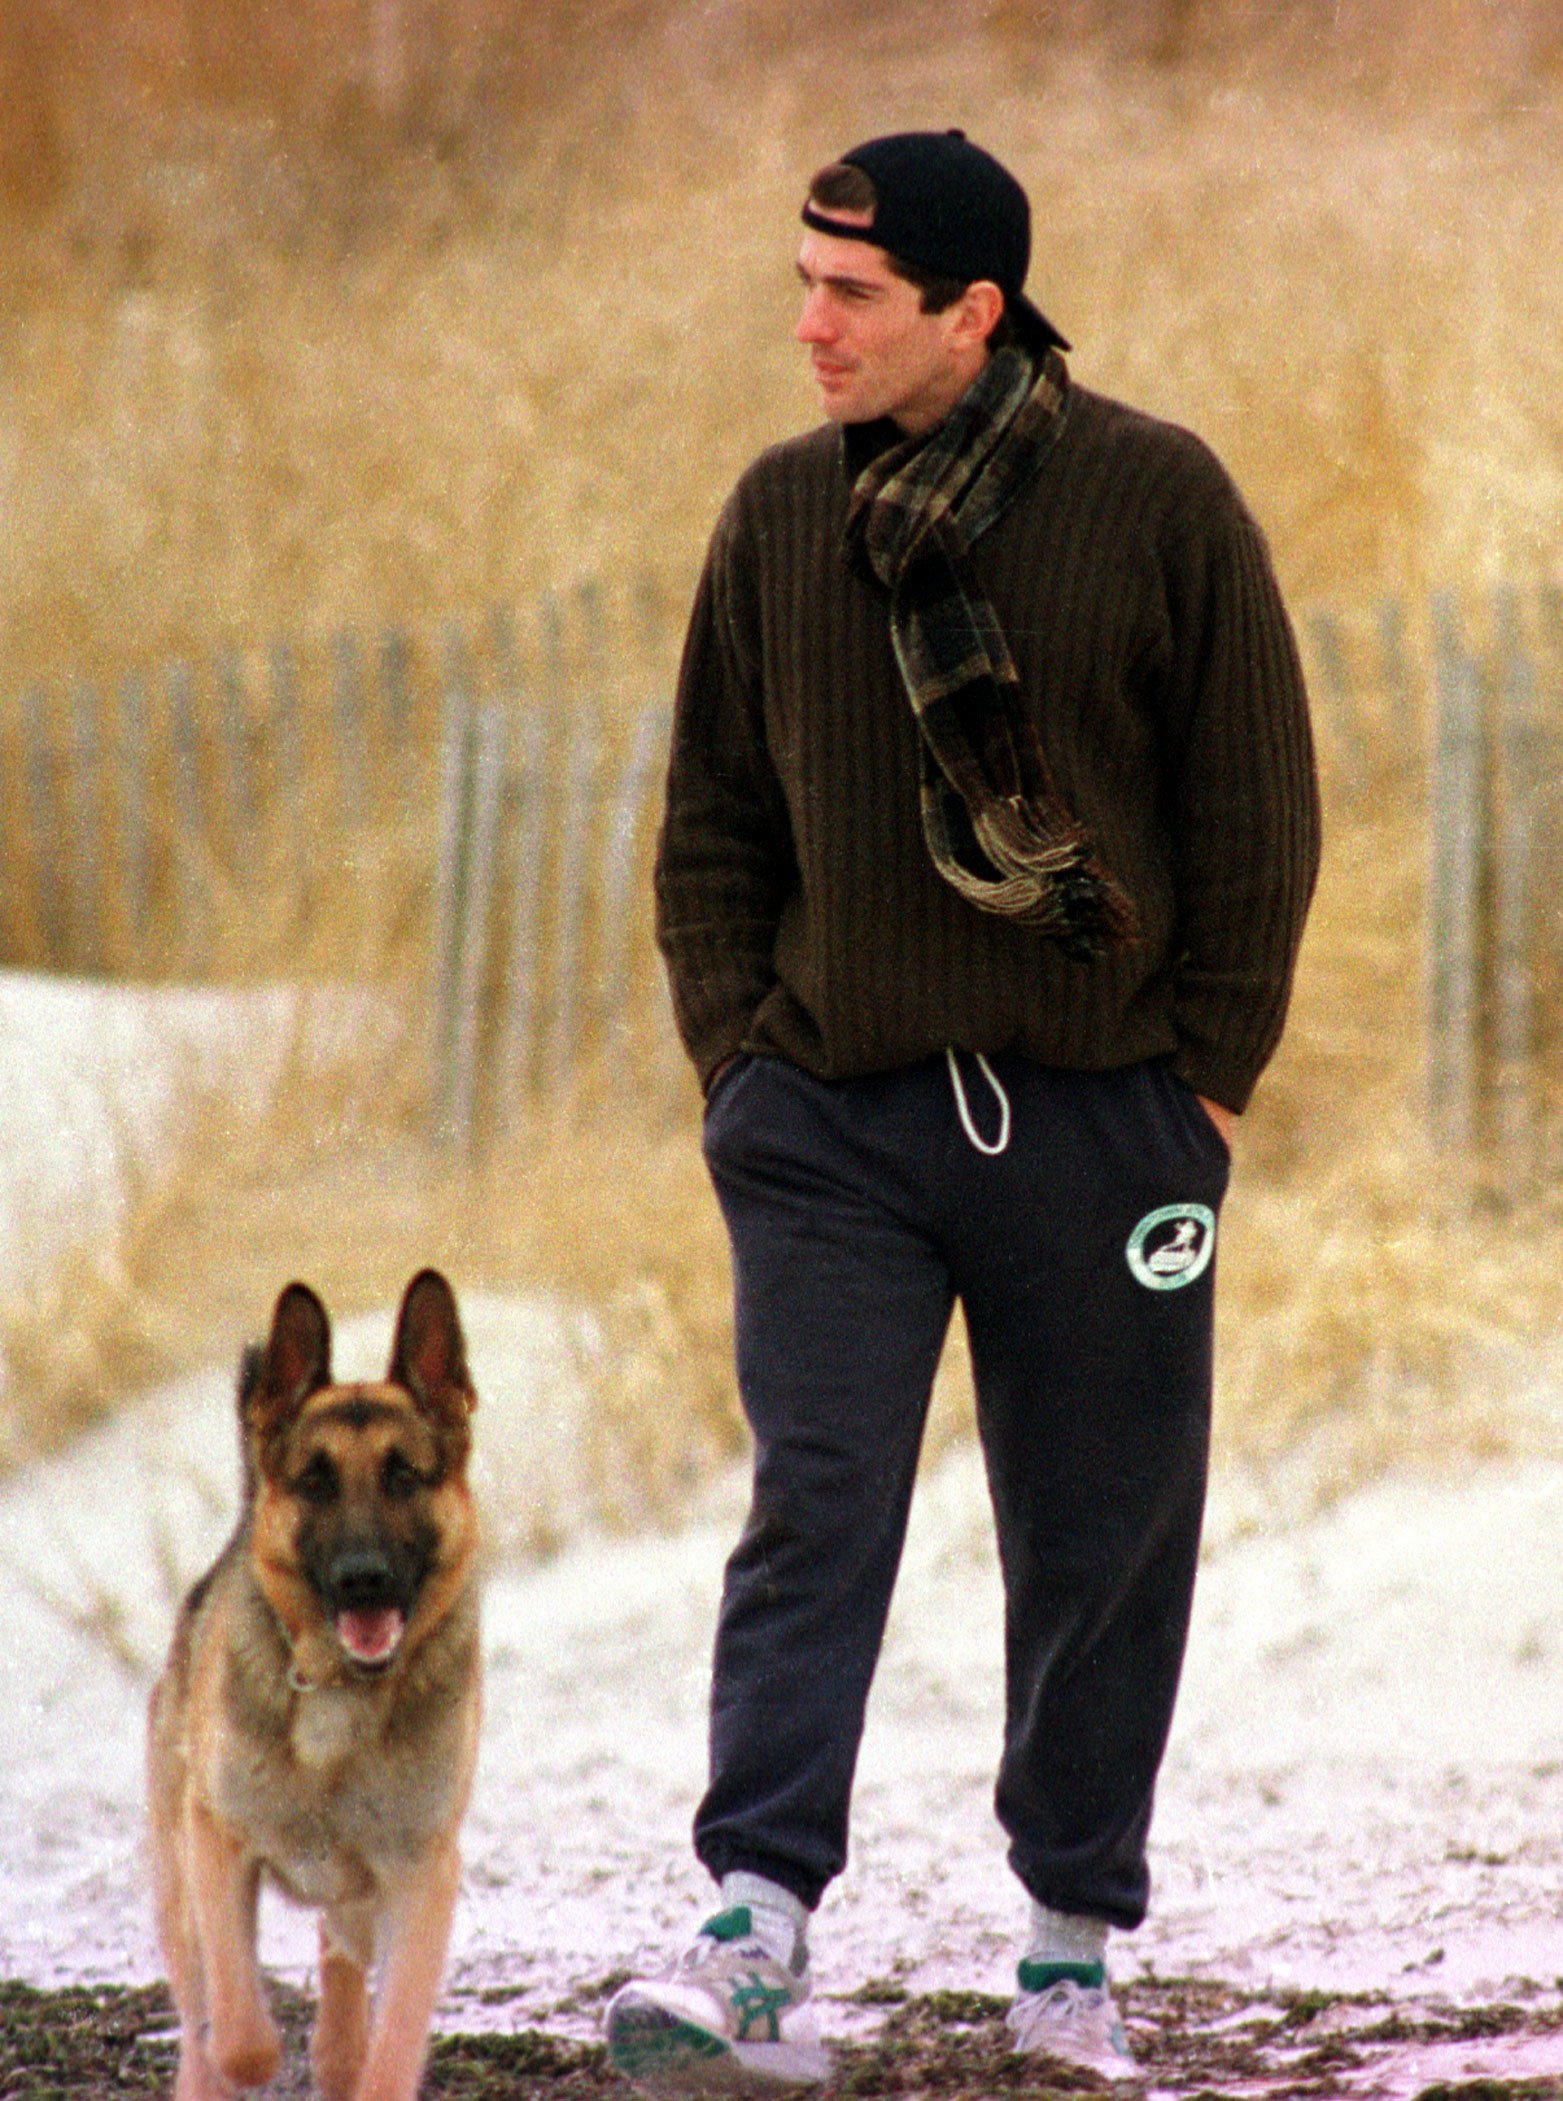 John F. Kennedy Jr. looks out to sea while walking with his dog along the beach in Hyannis Port, Massachusetts, January 24, 1995 | Photo: Getty Images